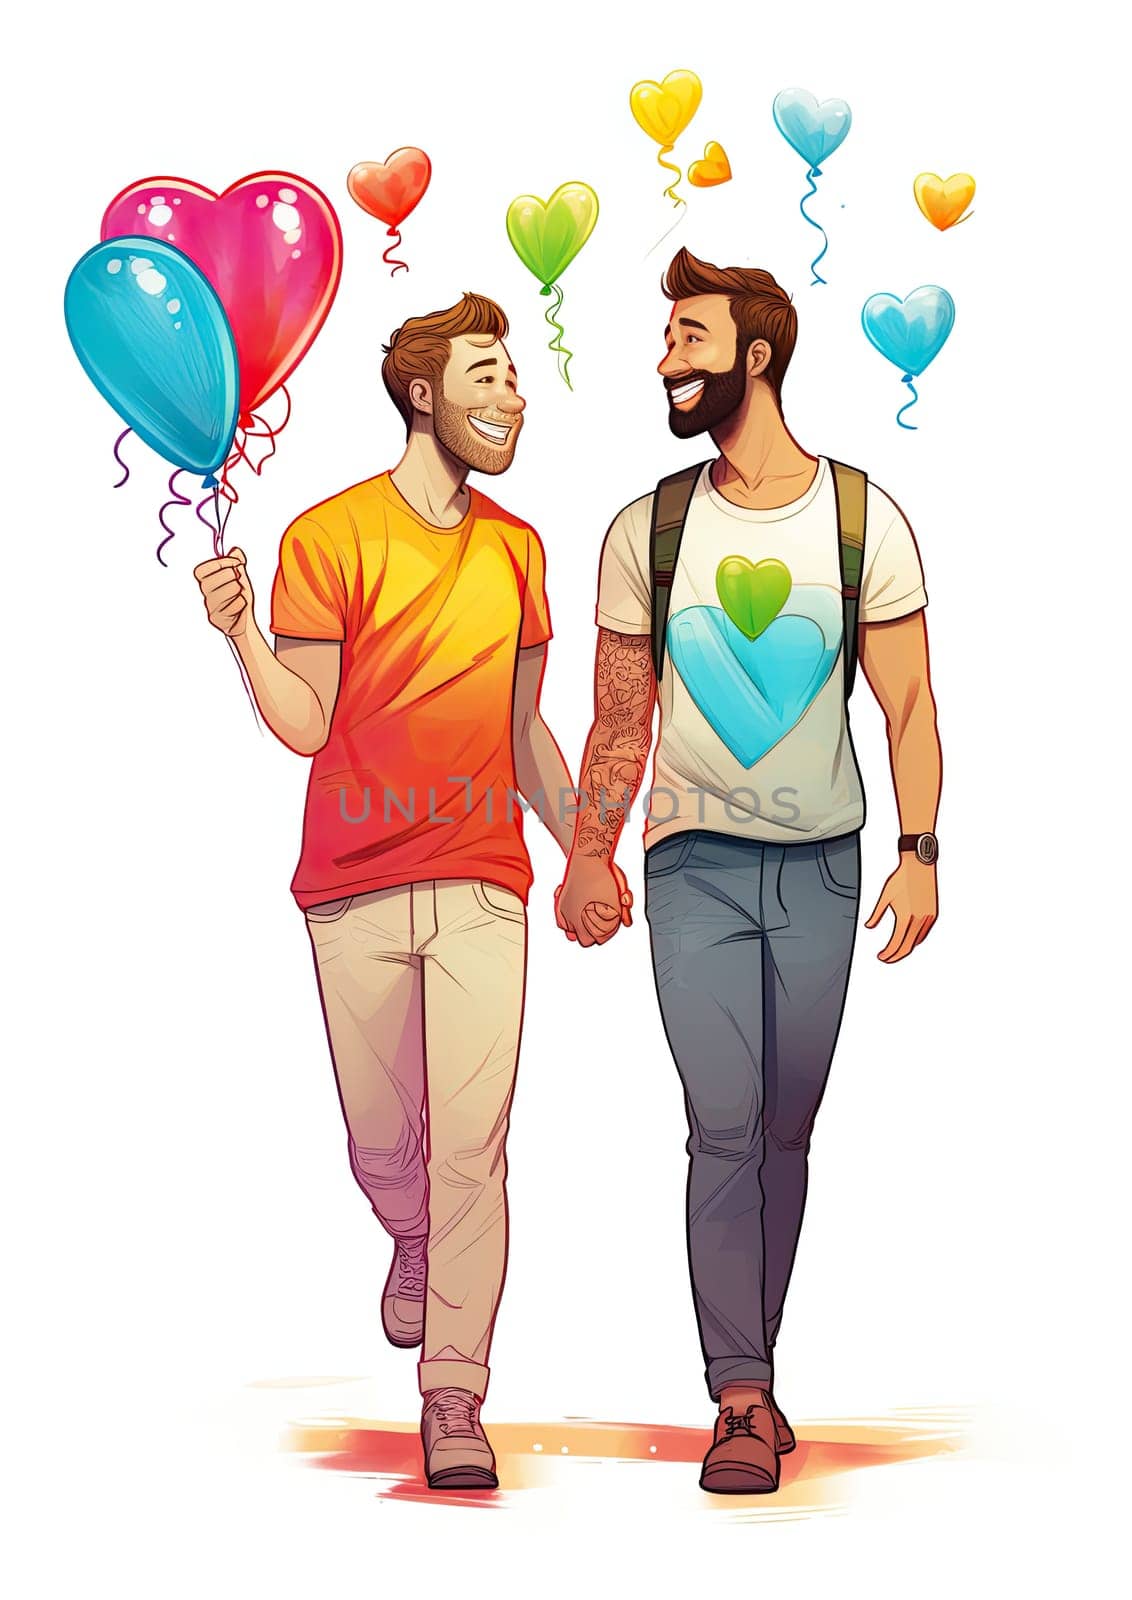 Illustration of two gay men holding hands and laughing with balloons in heart shape isolated on white background by papatonic